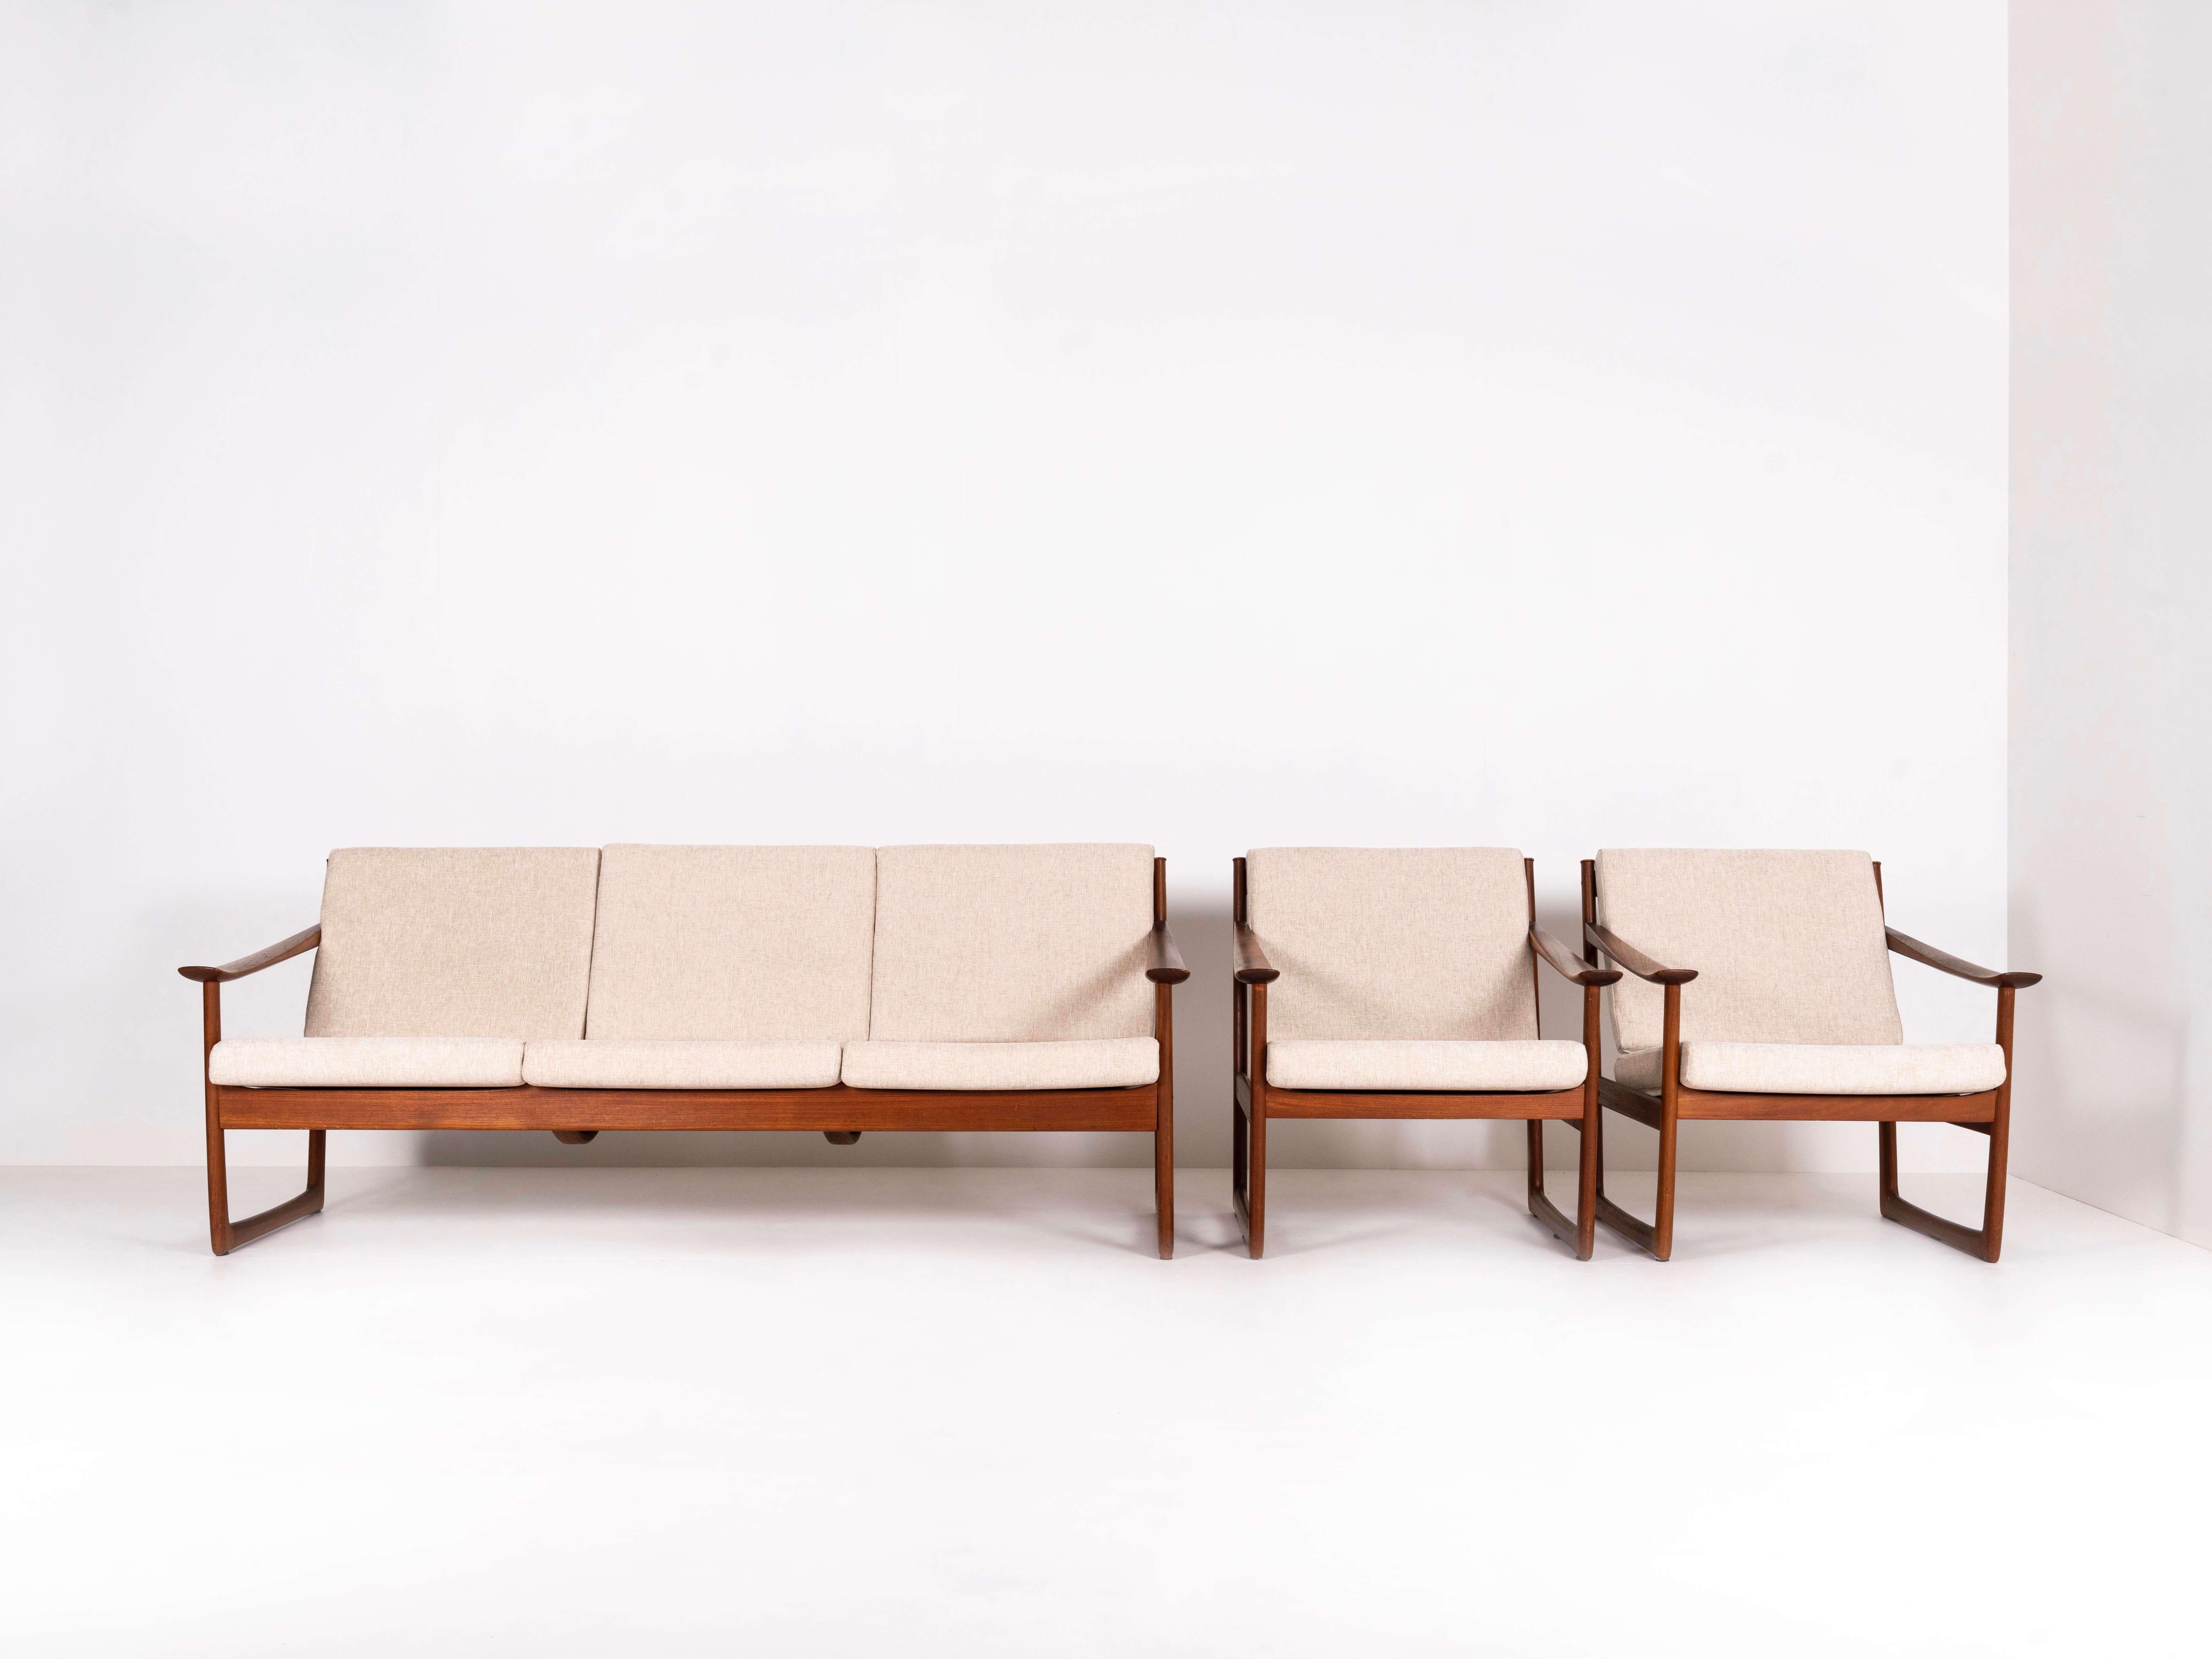 Amazing set of a three seater sofa and two arm chairs of the famous model FD130 by Peter Hvidt & Orla Mølgaard Nielsen. This set is manufactered for France & Søn in Denmark in the 1960s. The sofa and chairs have the recognizable arm rests and sides